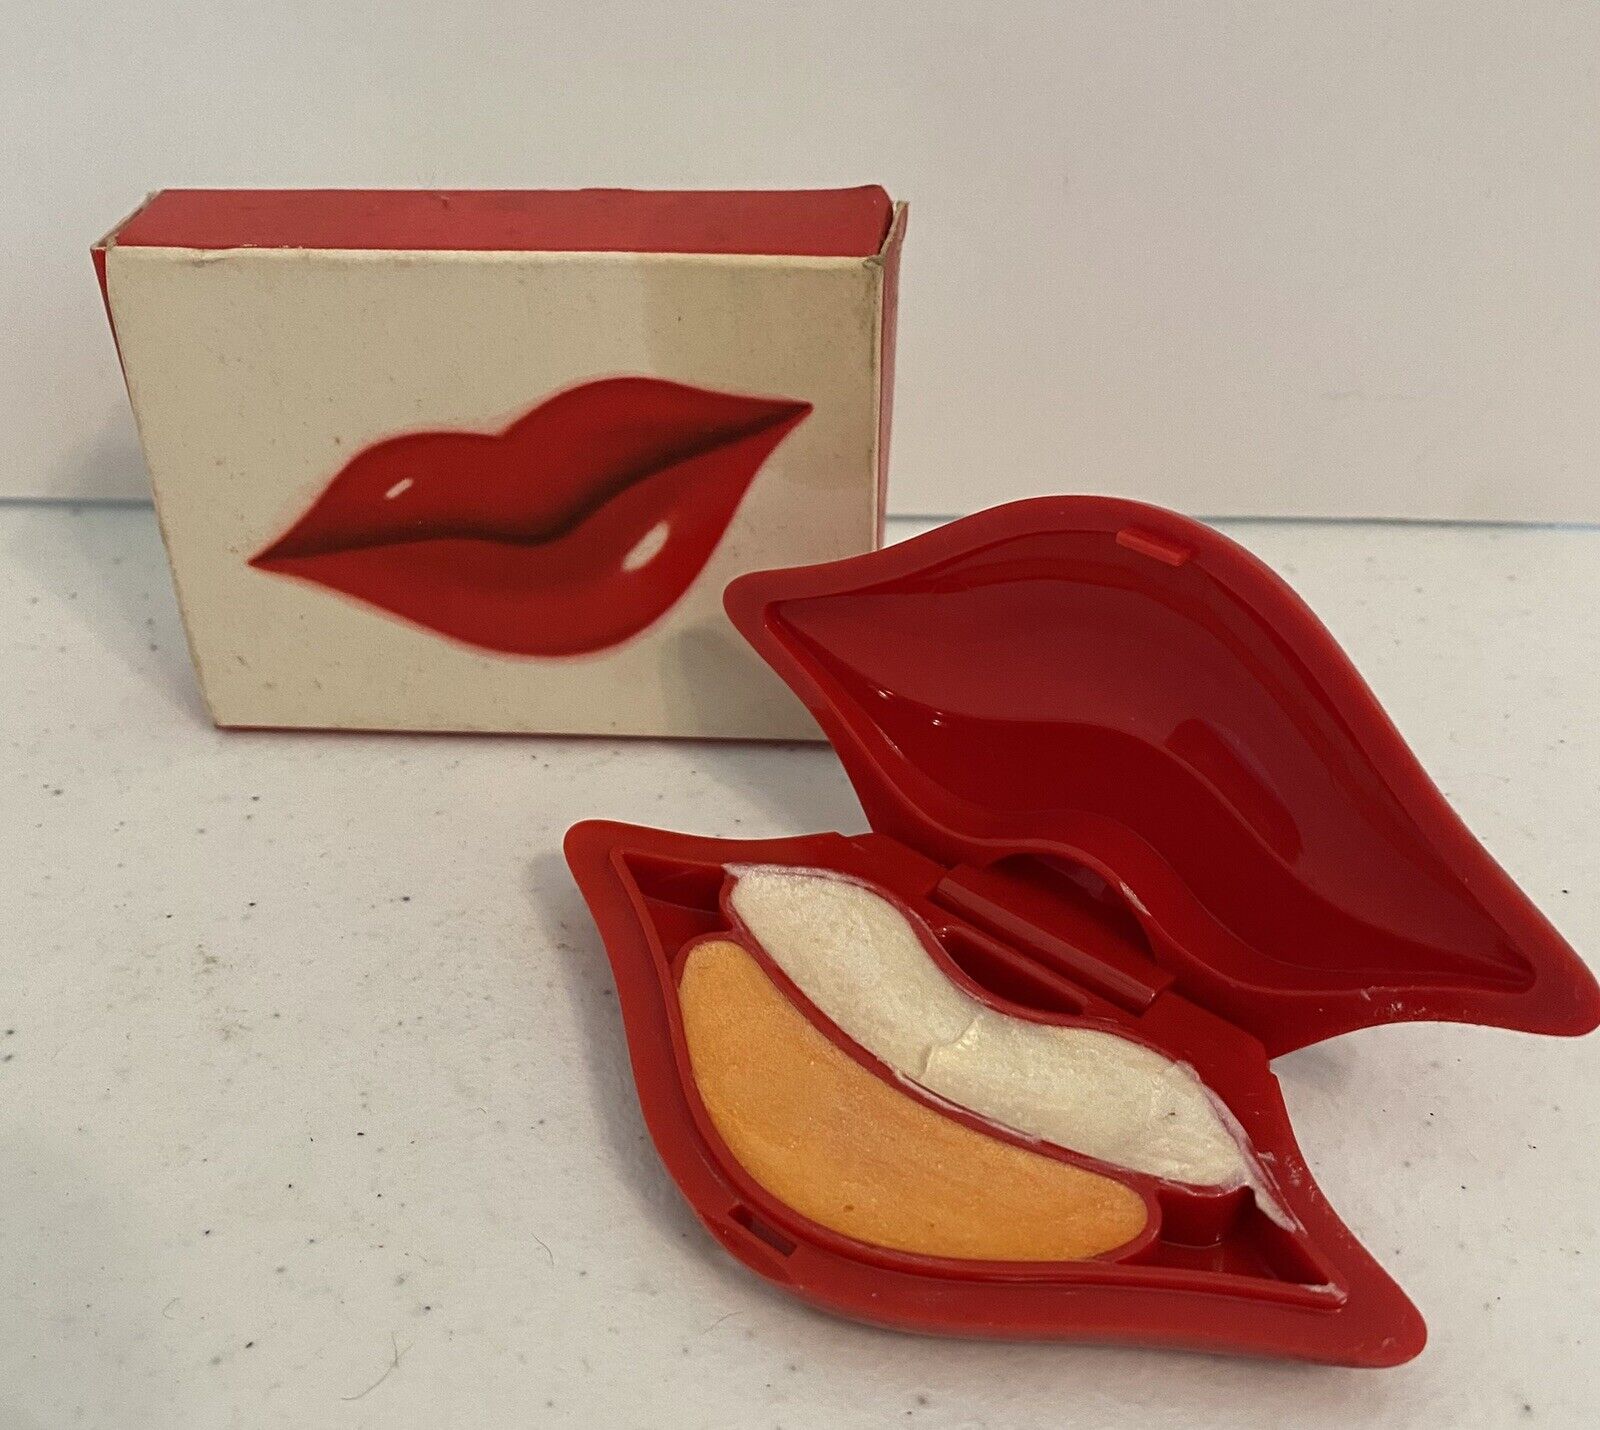 Vintage Avon Kiss’n Makeup Lip Gloss Compact Frostlight Peach/Pink with Box